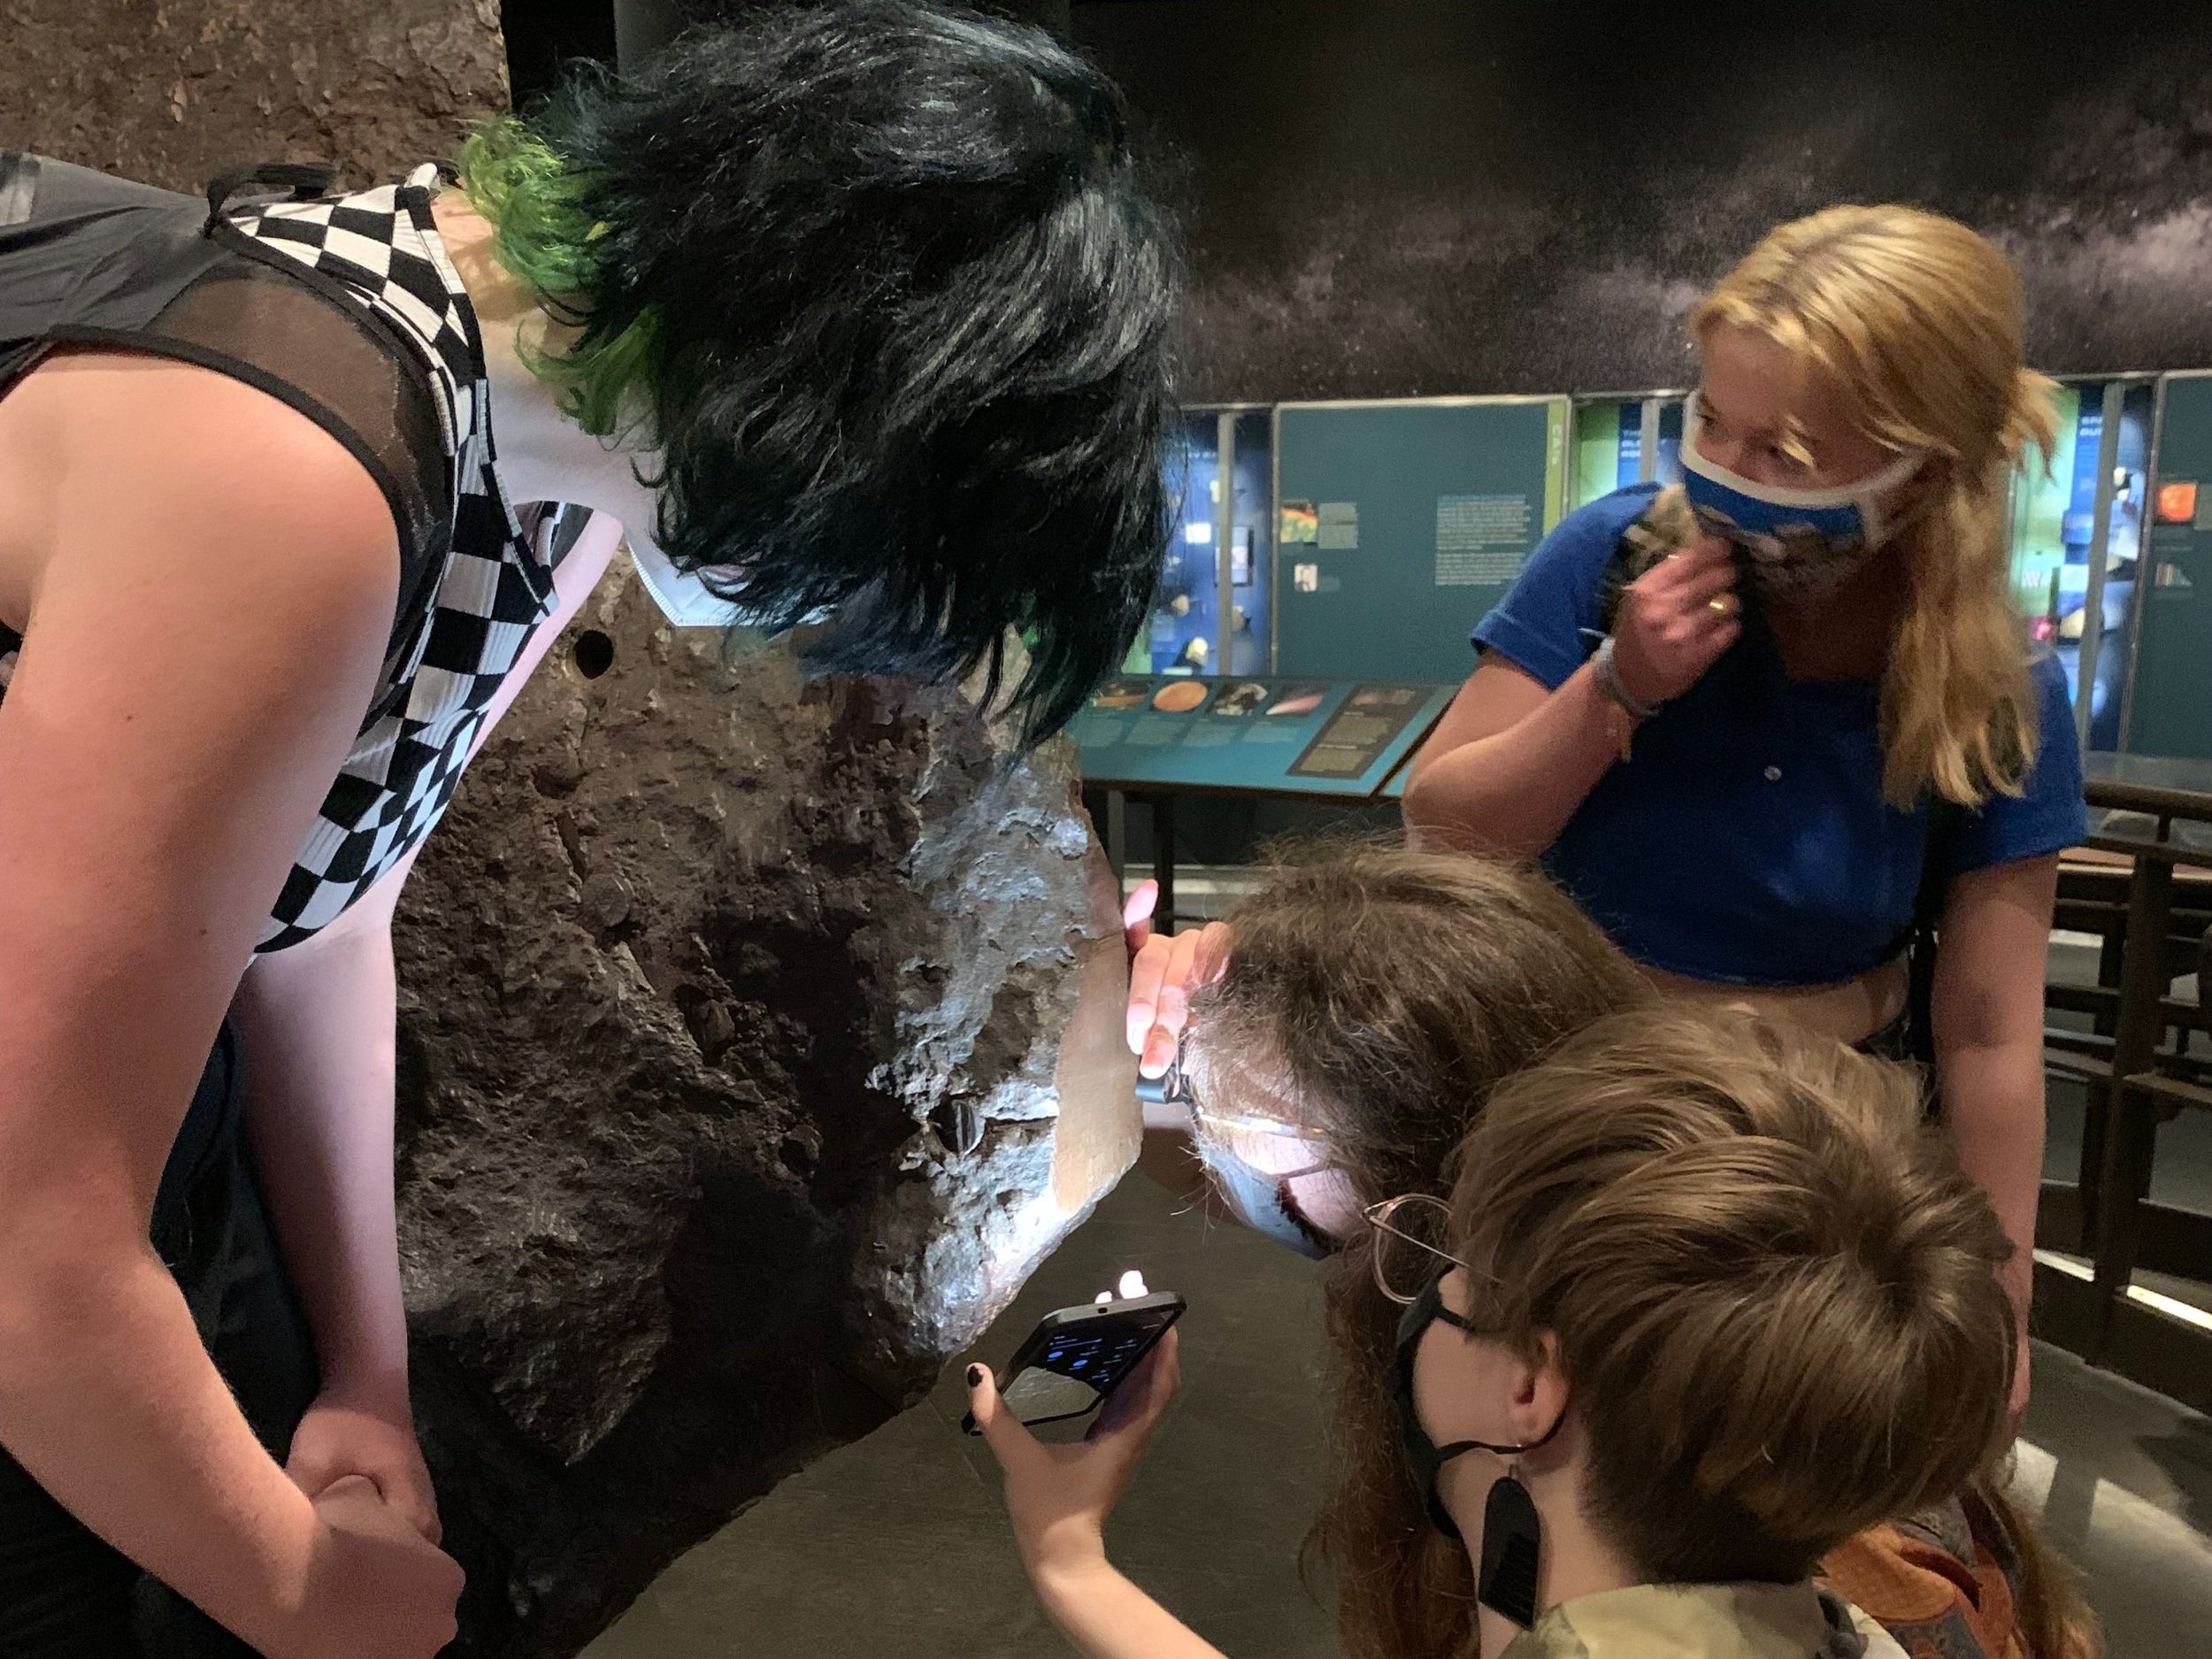 Checking out meteorites at the American Museum of Natural History.